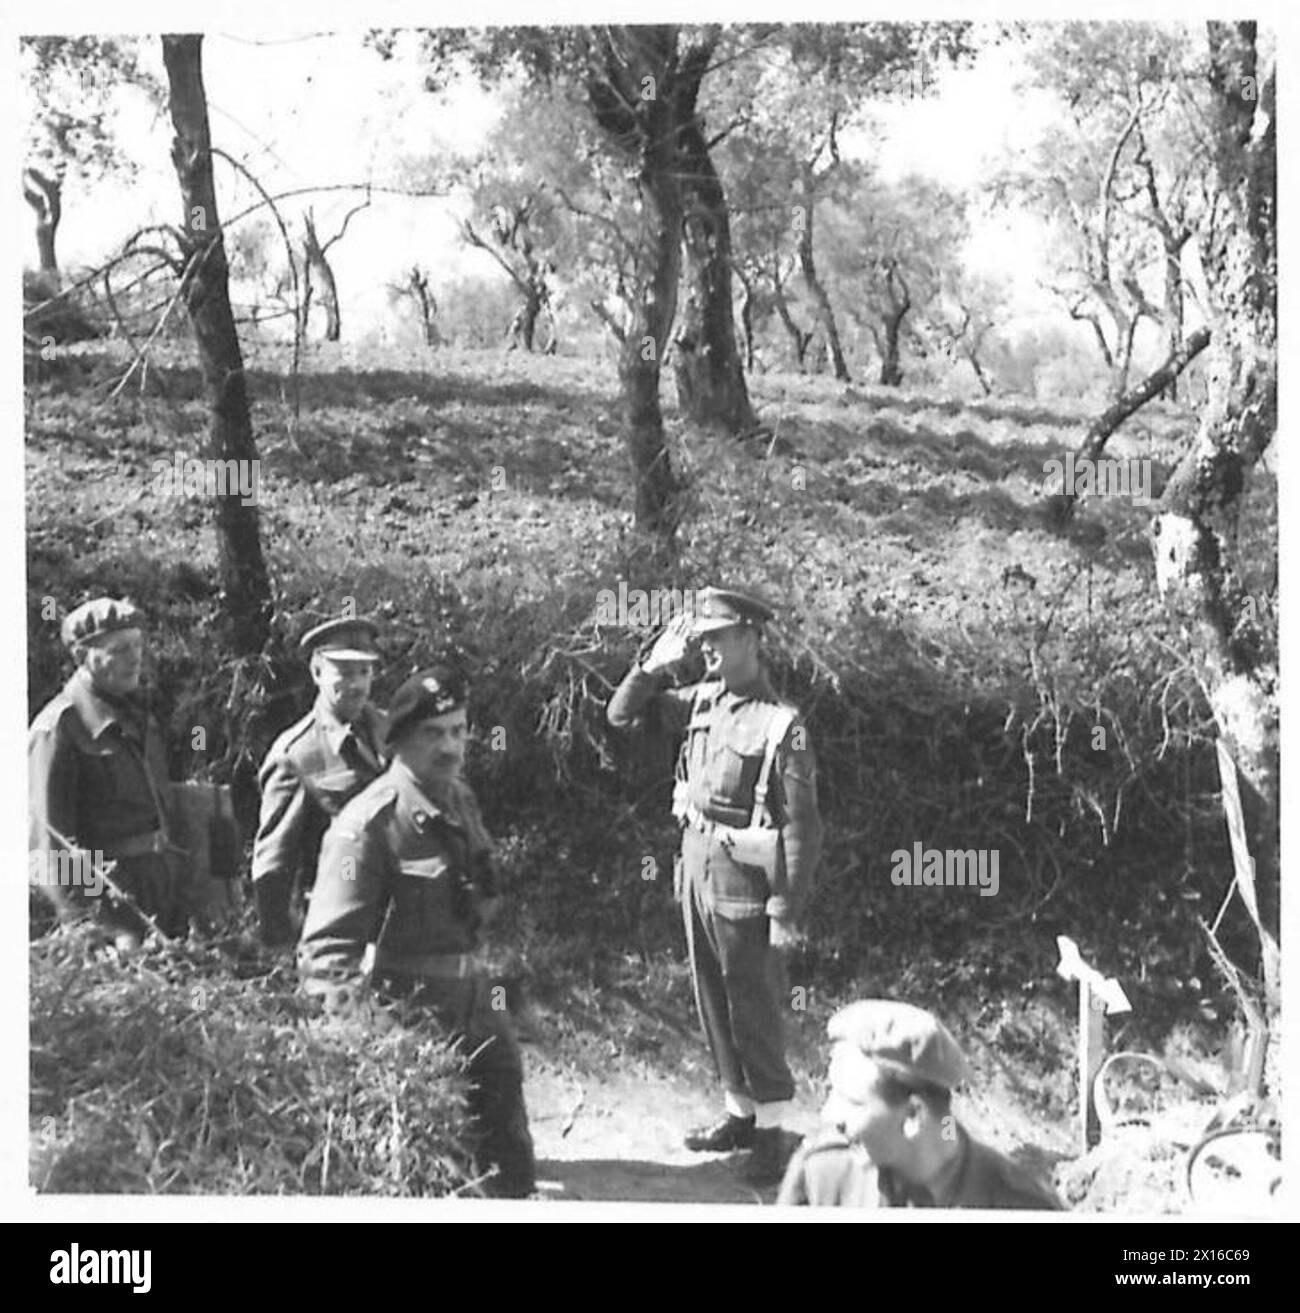 ALLIED ARMIES IN THE ITALIAN CAMPAIGN, 1943-1945 - General Władysław Anders, the CO of the 2nd Polish Corps, and Brigadier Thrith (second from the left) entering a trench leading to the British 78th Infantry Division HQ at Cervaro (near Cassino) during General's visit to the 78th Division. They are accompanied by Lieutenant Eugeniusz Lubomirski, General Anders' adjutant (first from the left) British Army, Polish Army, Polish Armed Forces in the West, Polish Corps, II, 78th Infantry Division, British Army, 8th Army, Anders, Władysław, Lubomirski, Eugeniusz, Thrith (Brigadier) Stock Photo